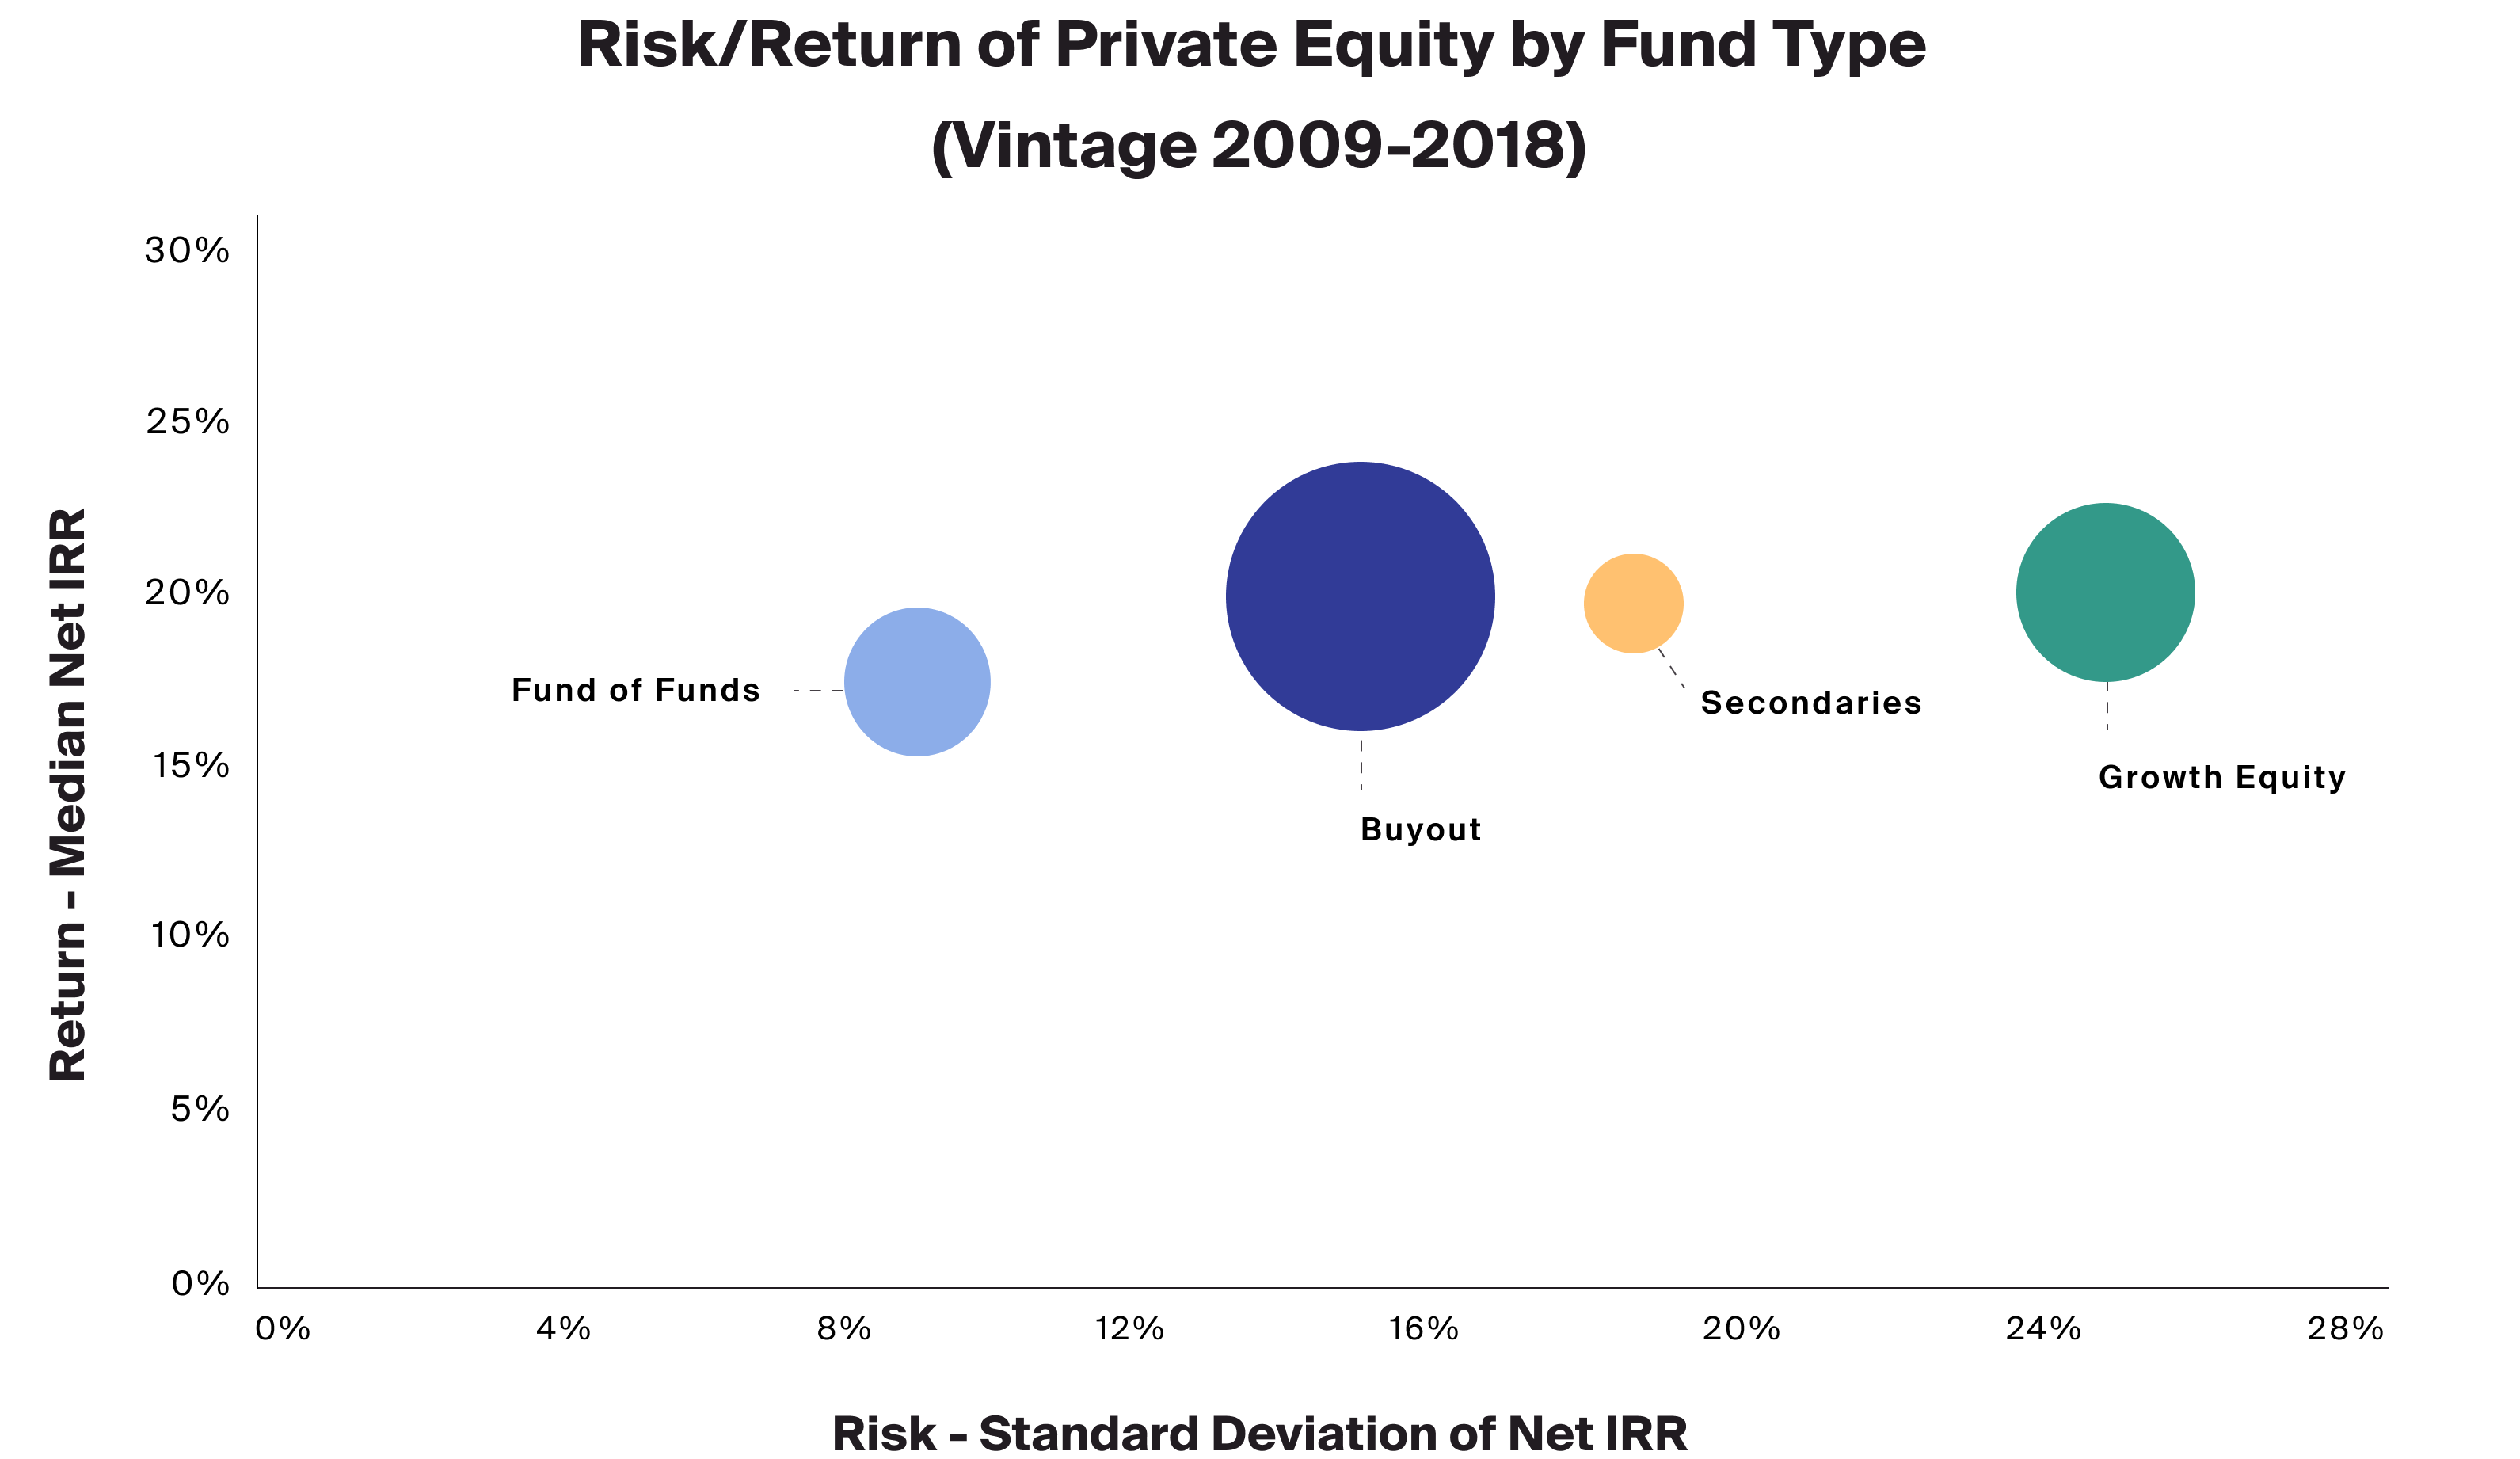 Exhibit 3: Private equity strategies can offer a range of risk and return profiles